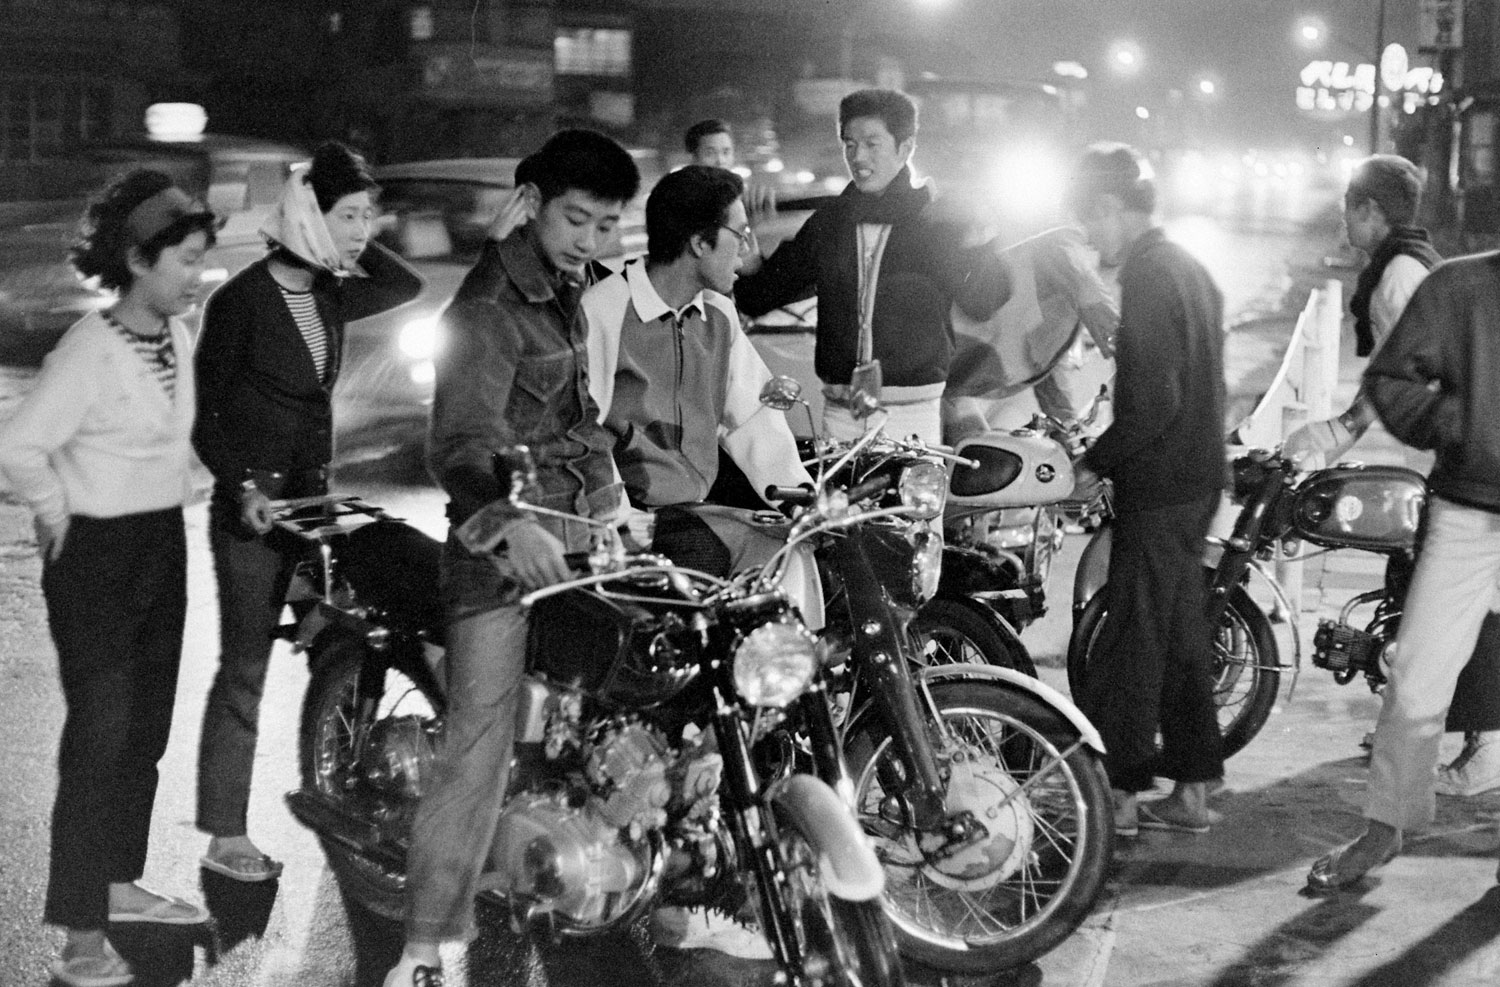 A group of "motorcycle kids," one of numerous subsets of teen subcultures in Tokyo, 1964.